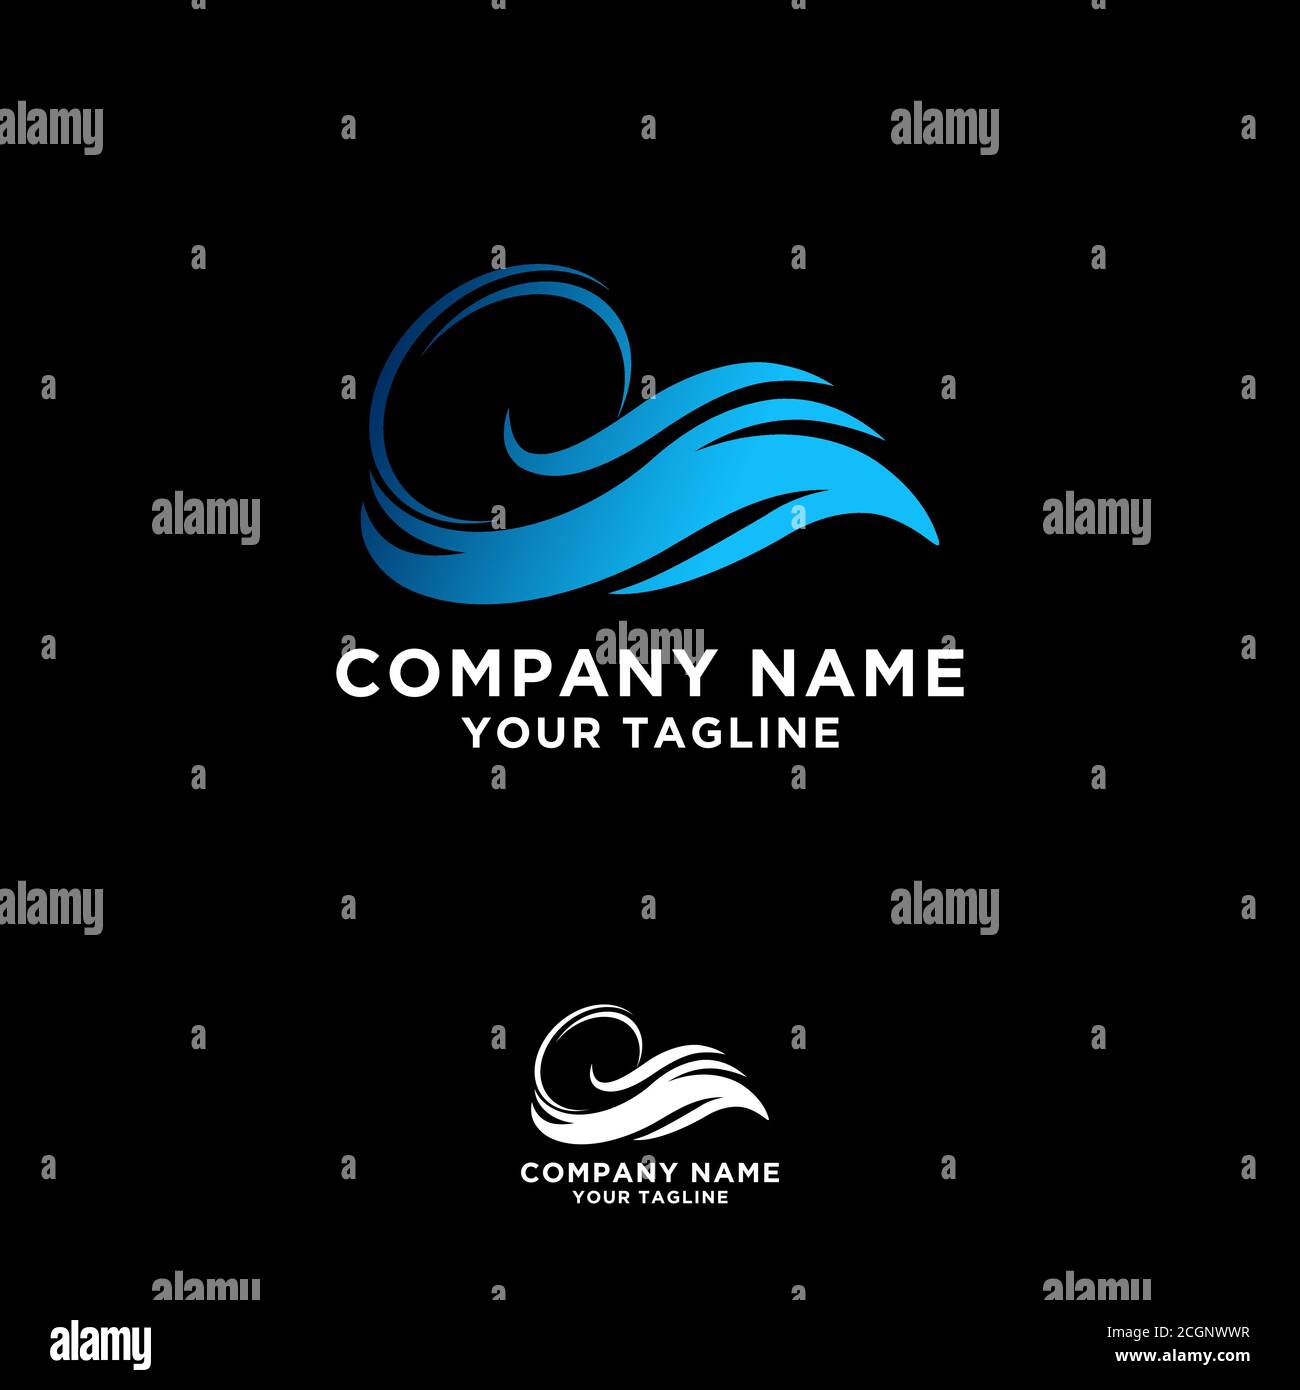 wave Logo illustration design template. flowing liquid water symbol icon in vector for any corporate or company use. Stock Vector